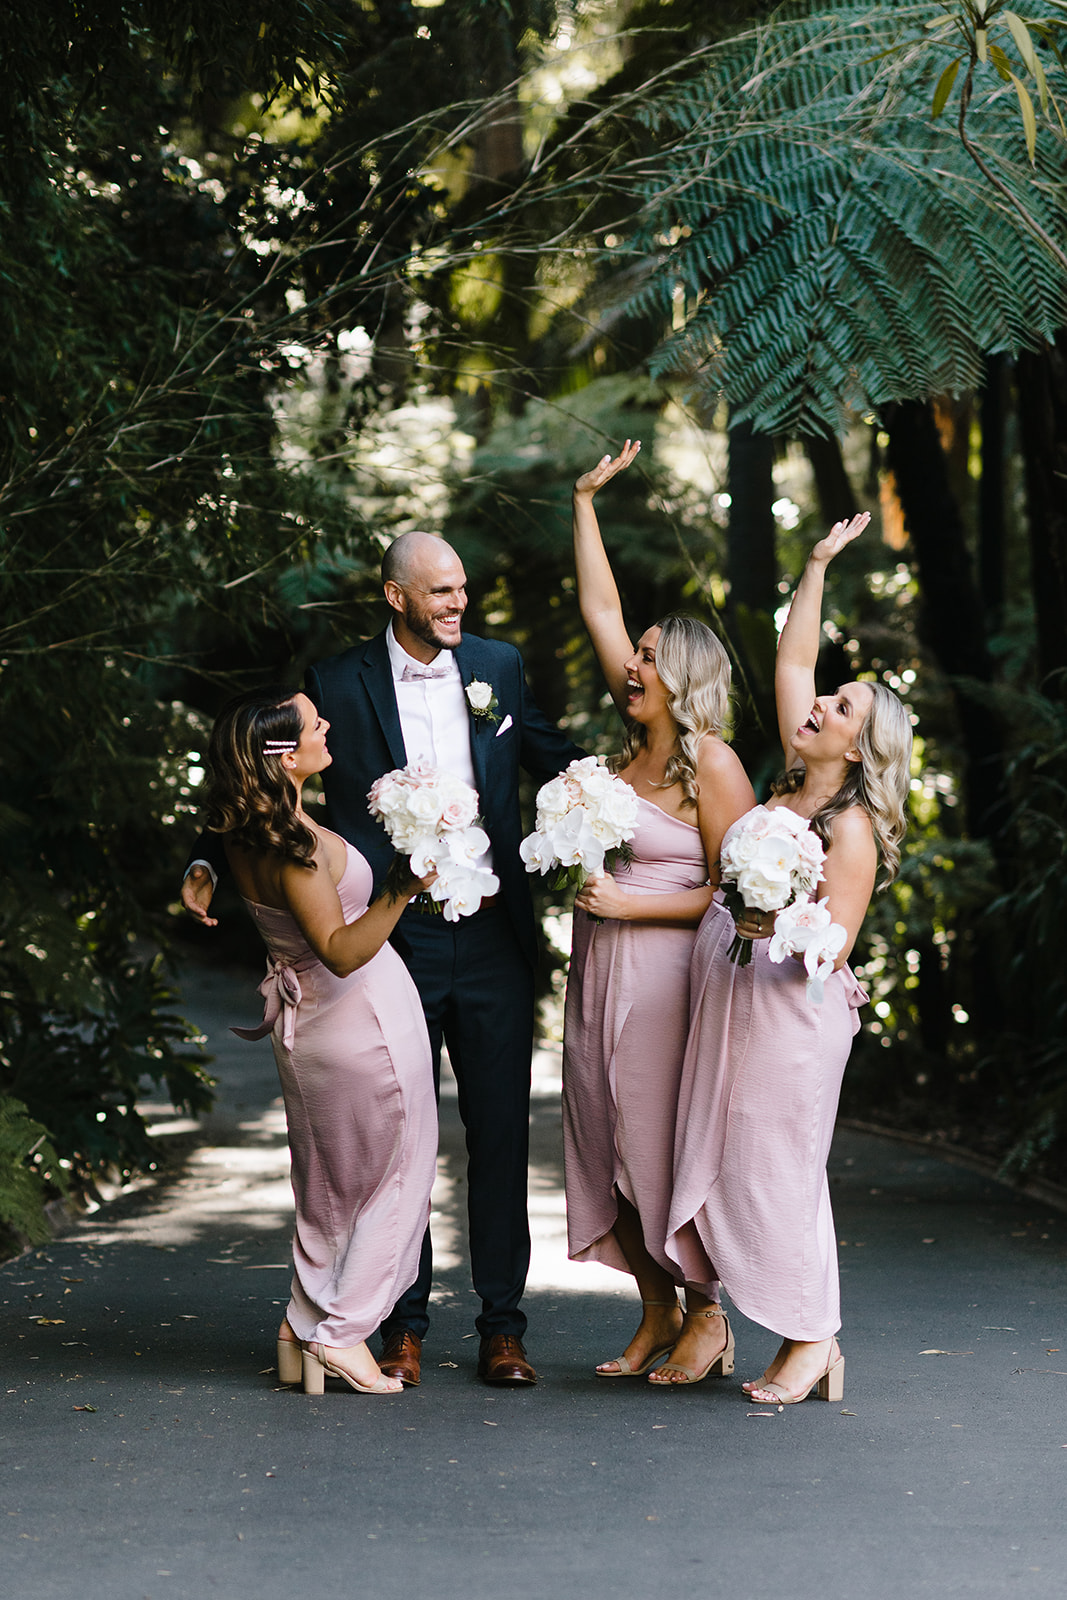 Groom and bridesmaids at The Terrace Royal Botanic Gardens Melbourne wedding